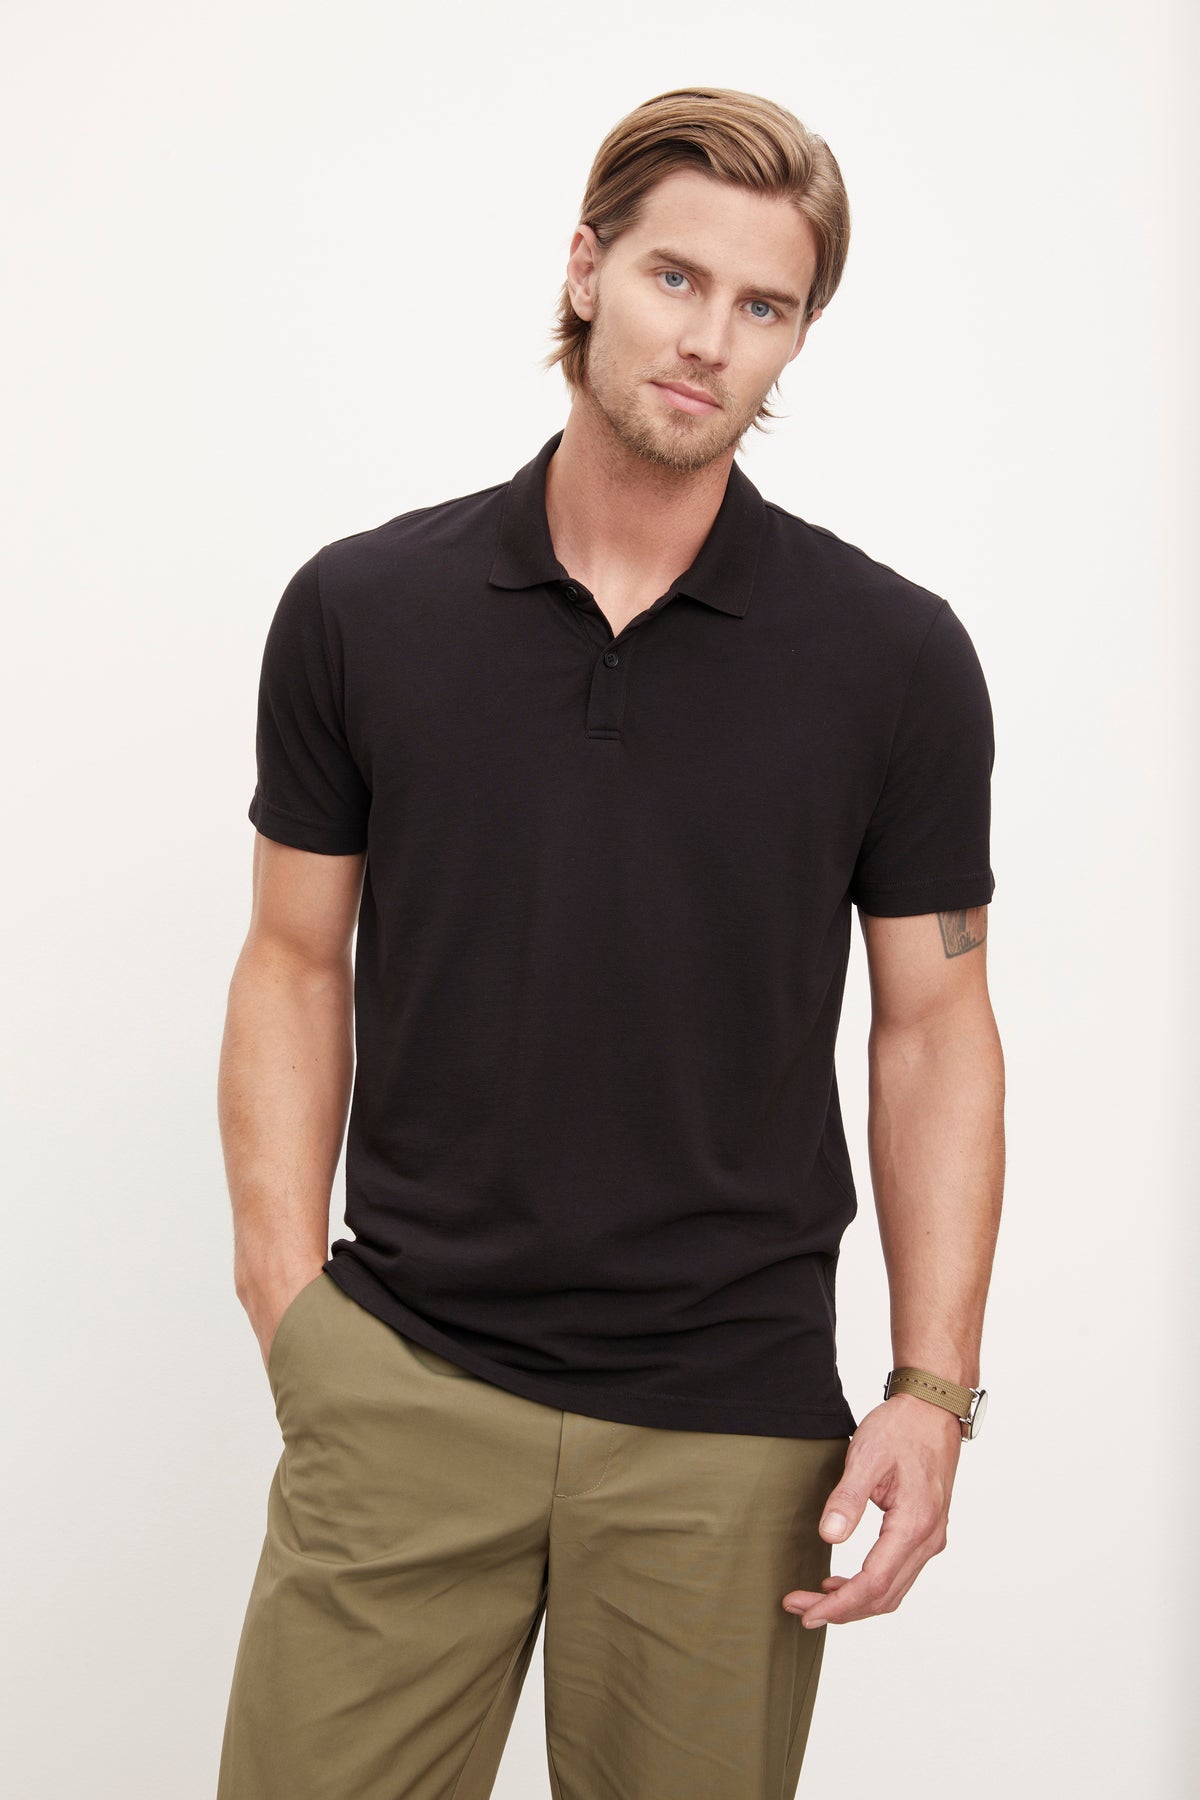   A man wearing a black Velvet by Graham & Spencer Willis Pique Polo shirt and khaki pants. 